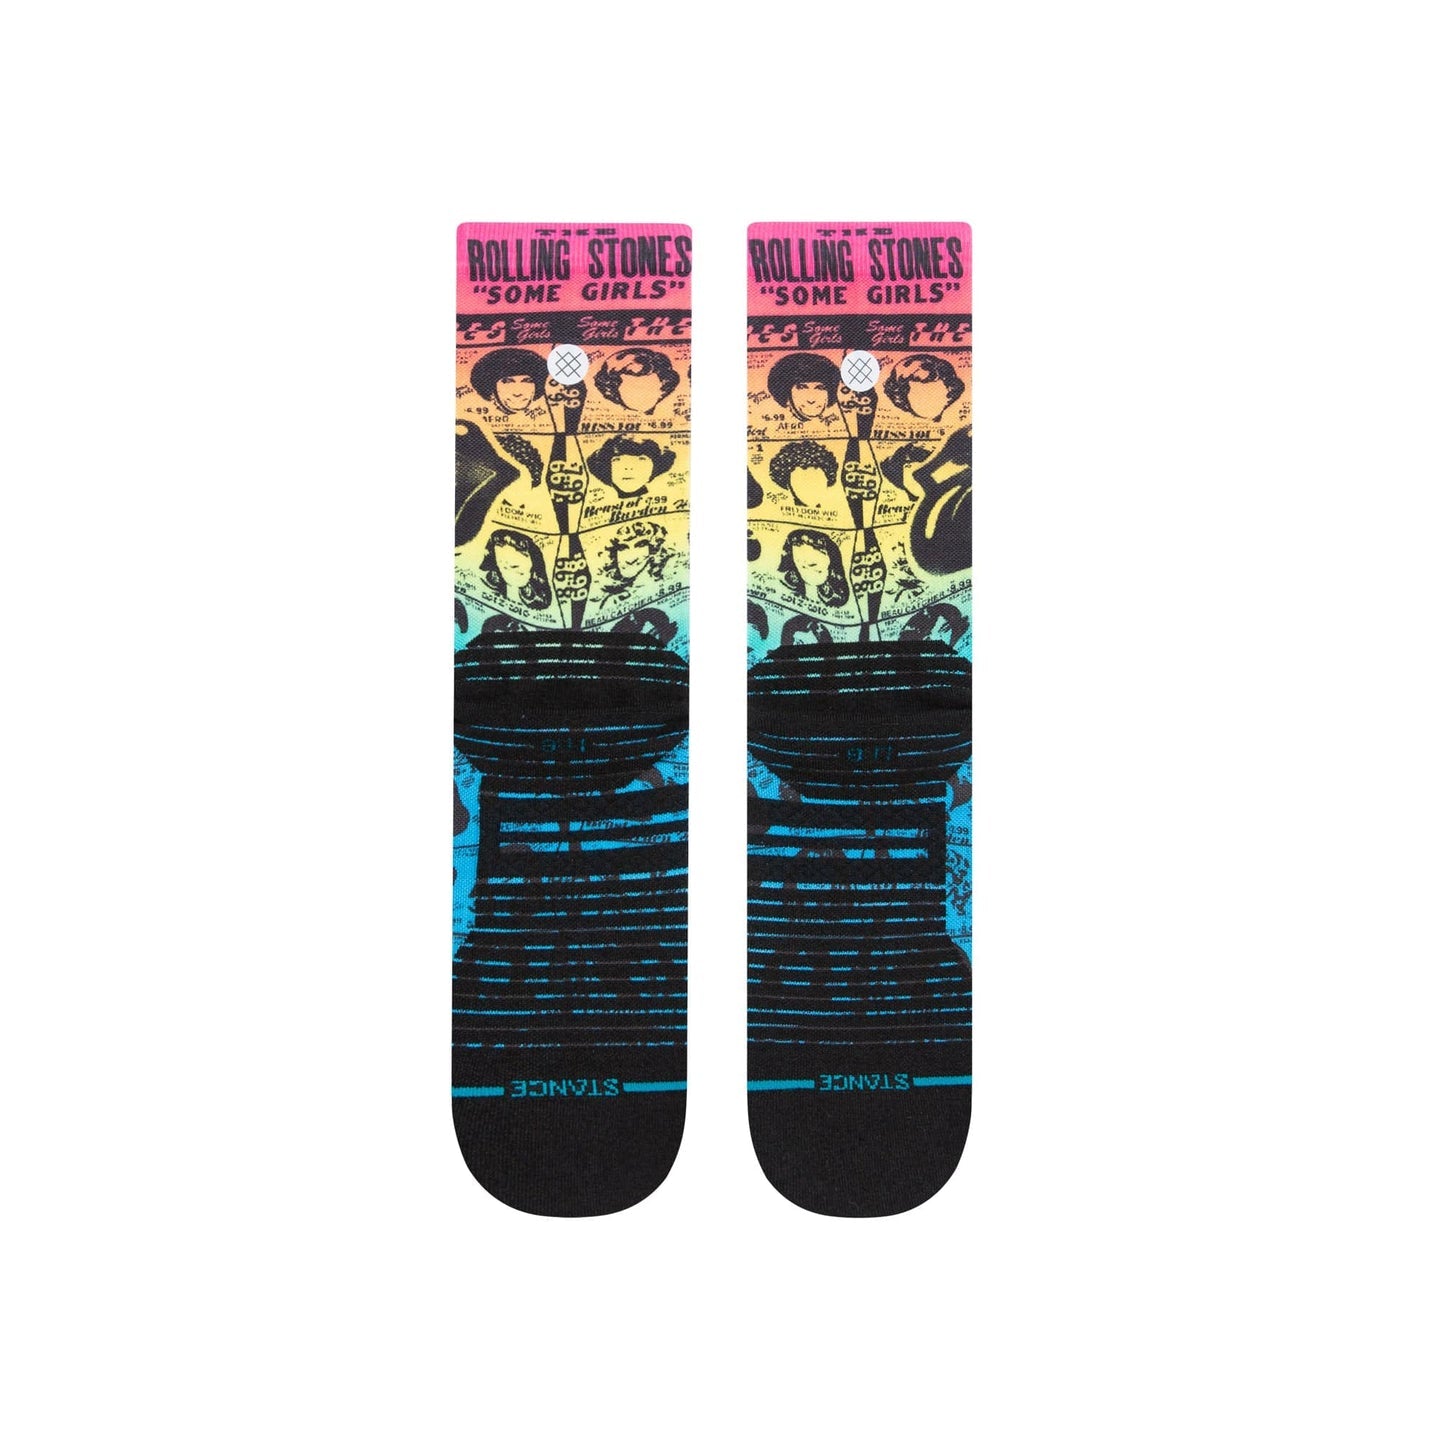 THE ROLLING STONES X STANCE Athletic Crew Socks